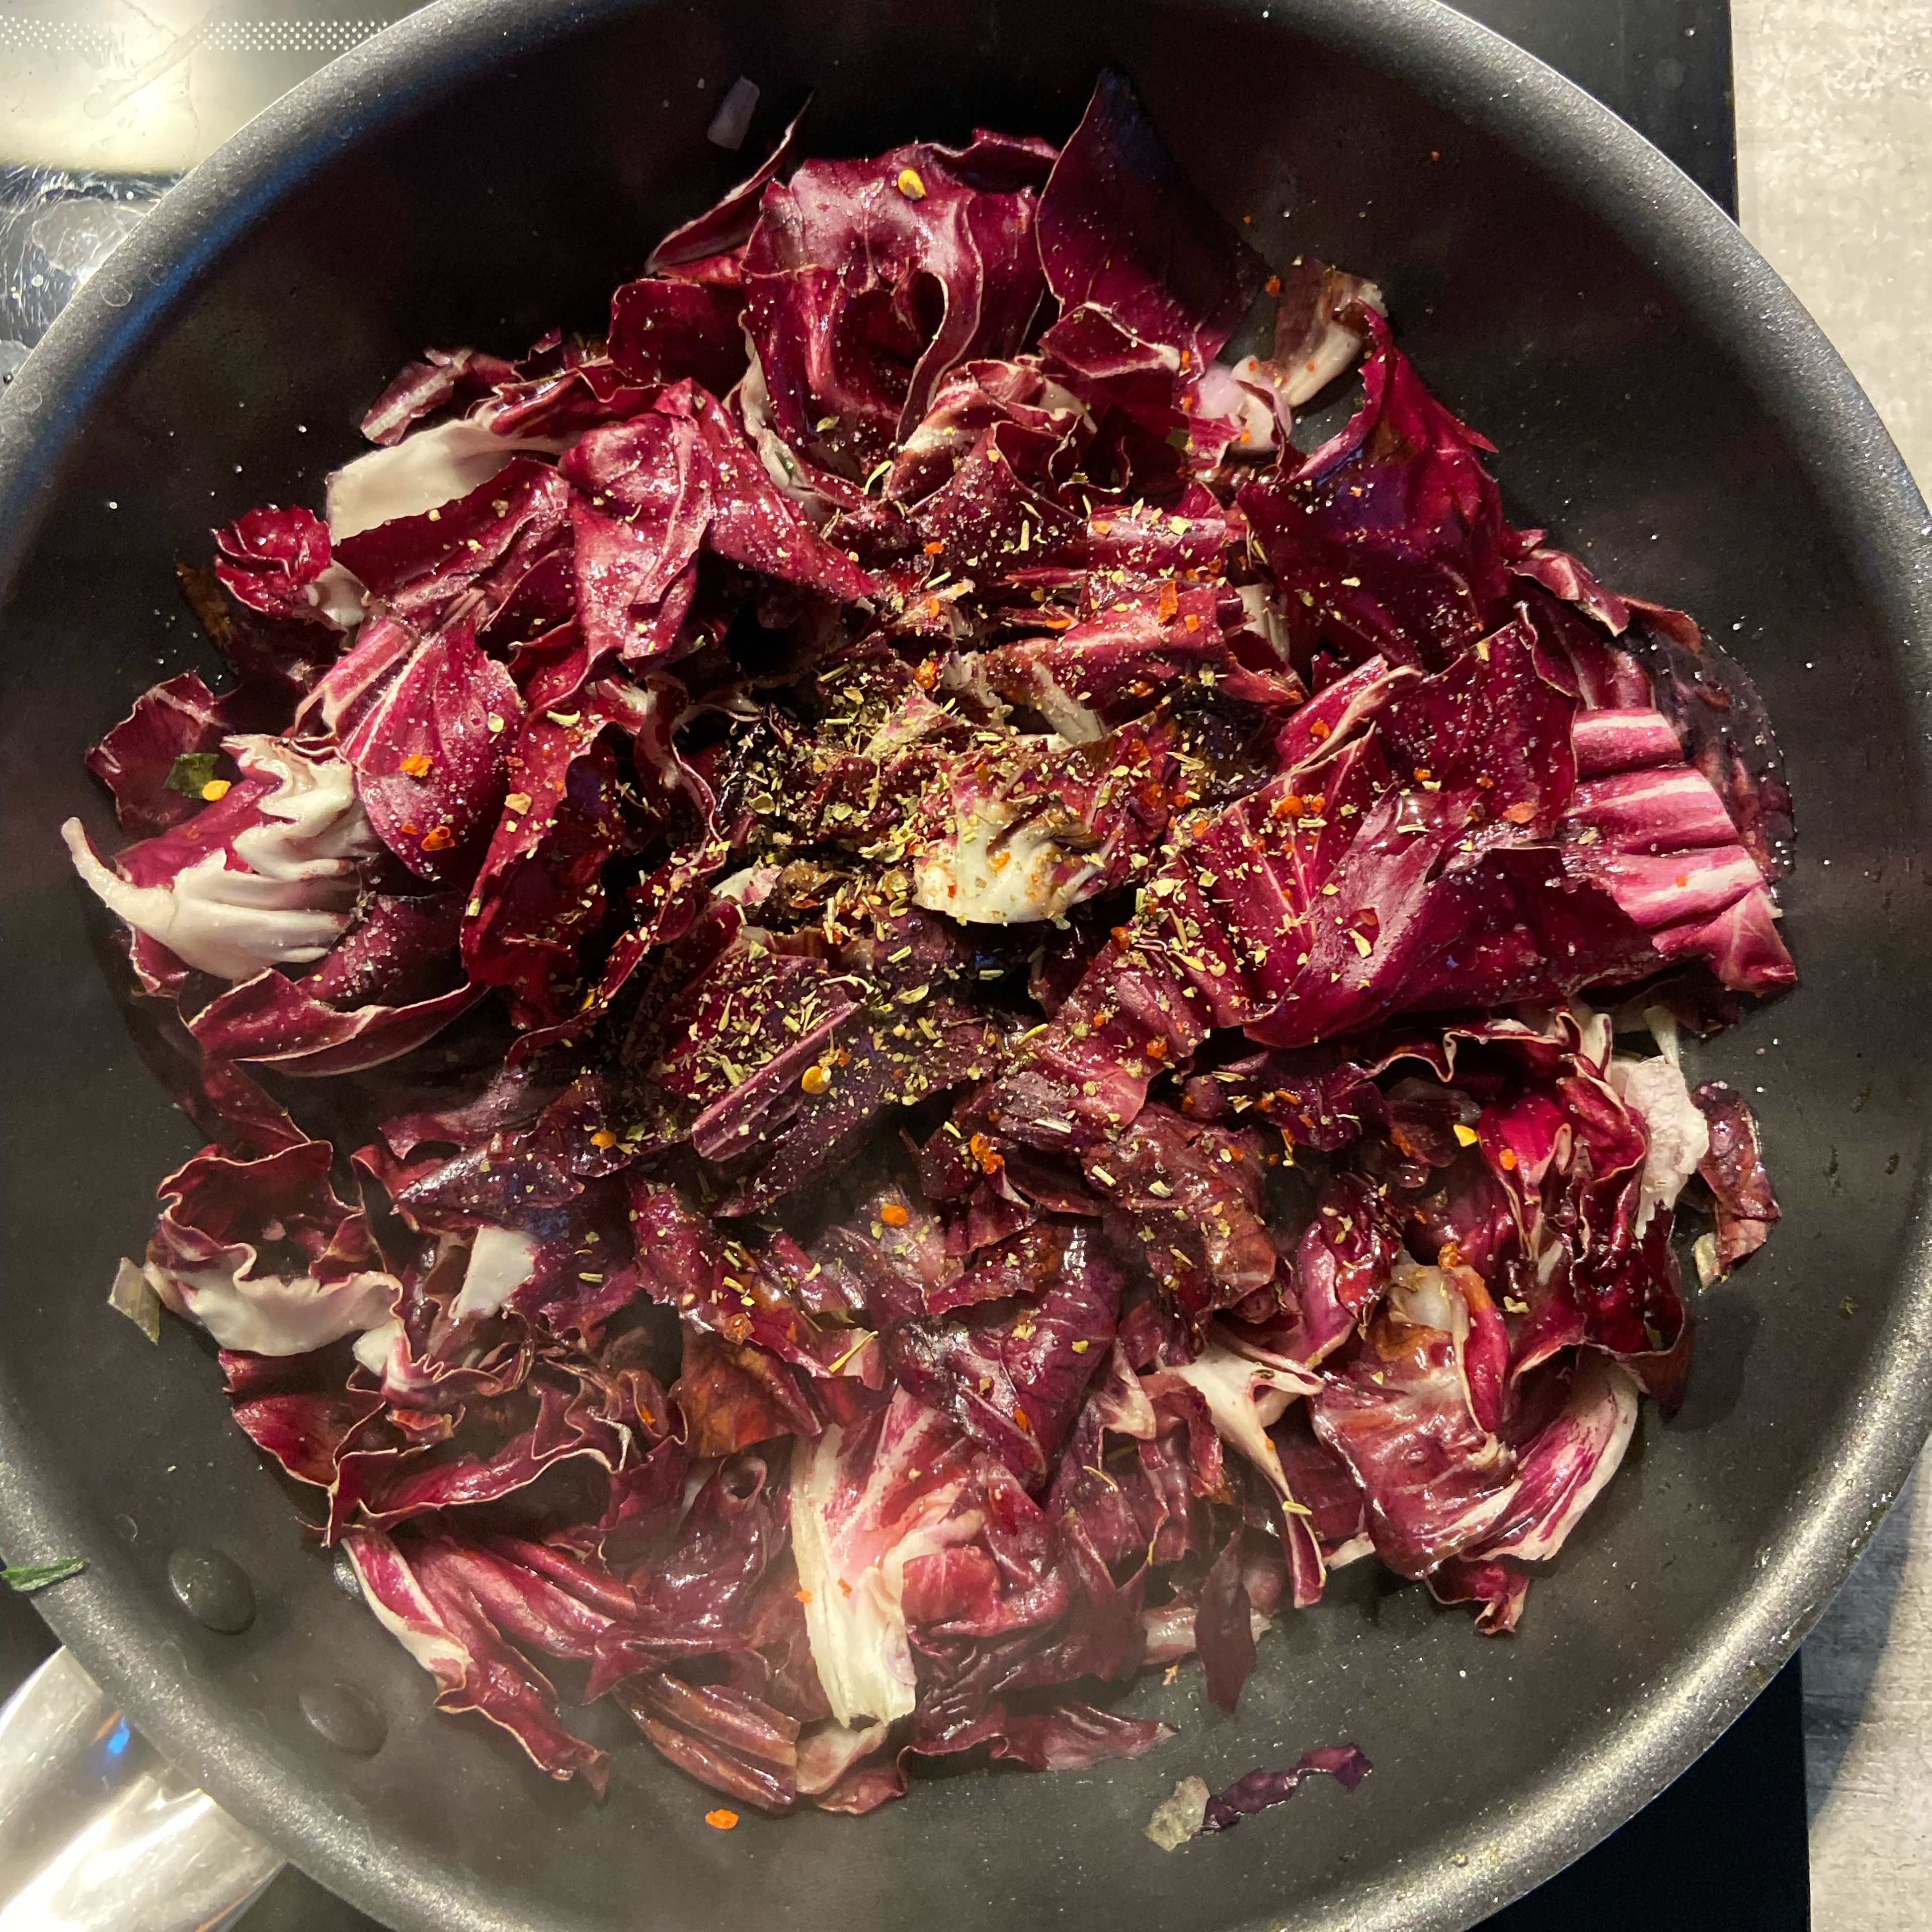 Add oil and half red onion to a frying pan. When golden, add the sliced radicchio and let it cook for a few minutes until it starts becoming softer. Then add the red wine, salt and pepper, and keep cooking for around 10 minutes.